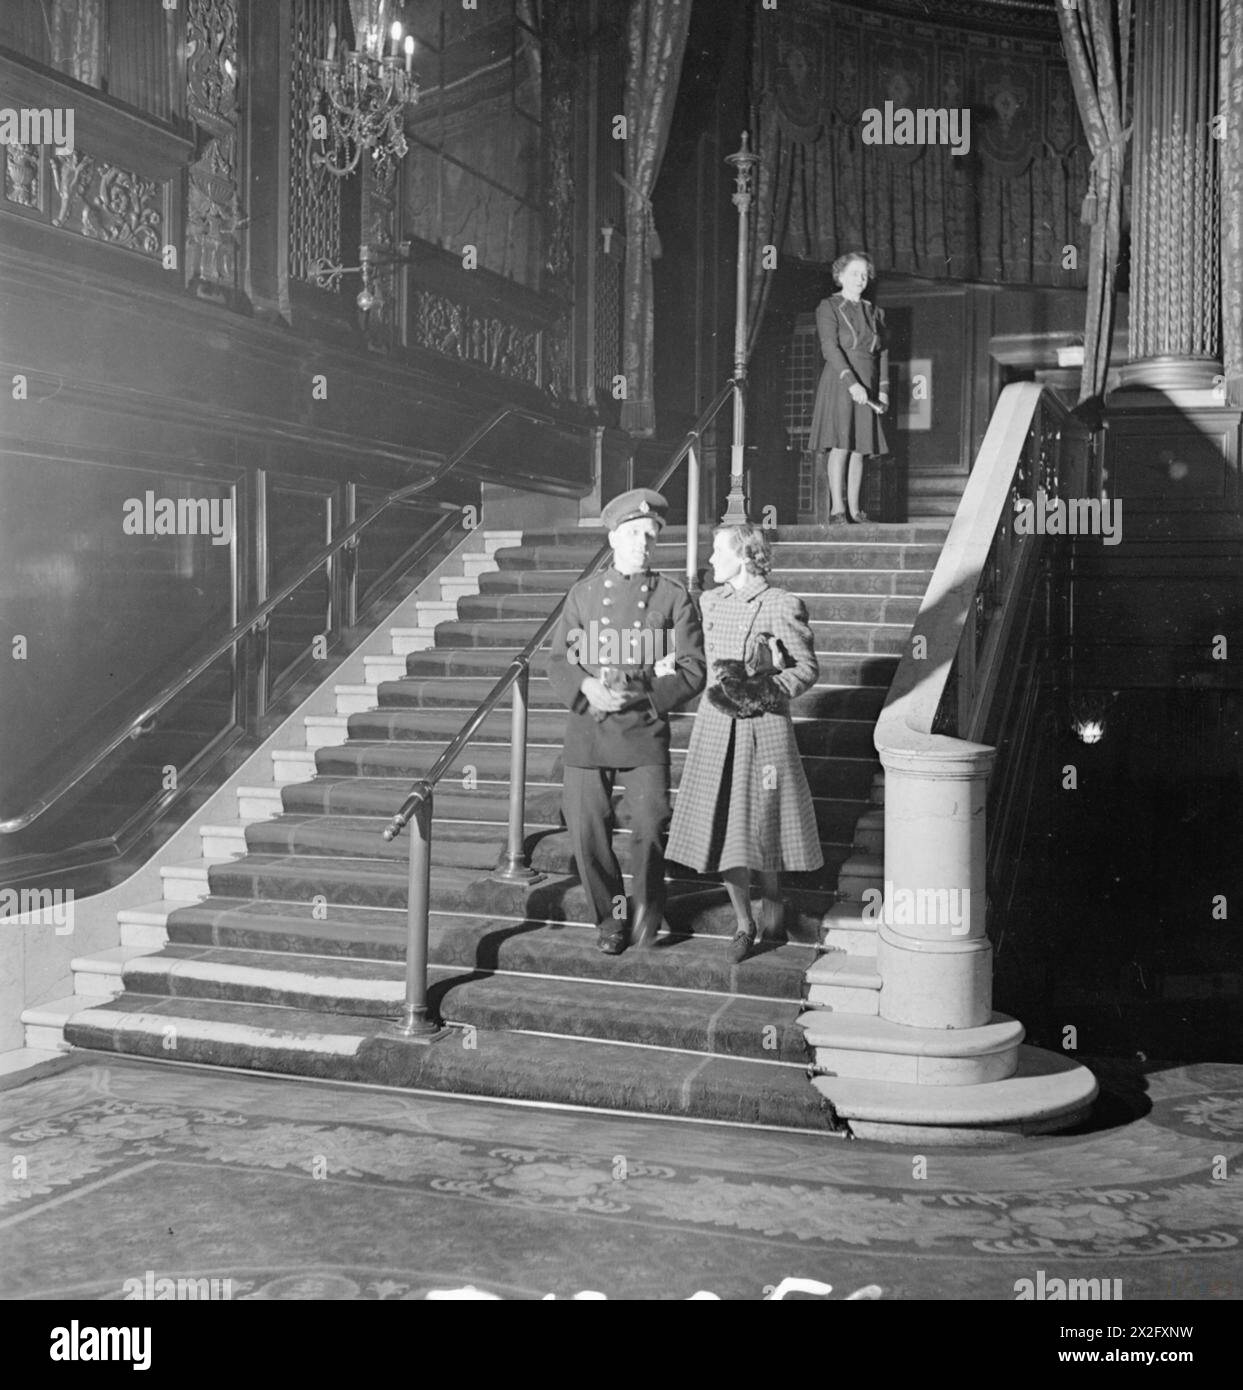 CINEMAS AND CINEMA-GOING DURING THE SECOND WORLD WAR - National Fire Service fireman Sydney Chillingworth and his wife Hilda descend the staircase of a cinema, after having seen a film, somewhere in London. An usherette can be seen standing at the top of the stairs Stock Photo